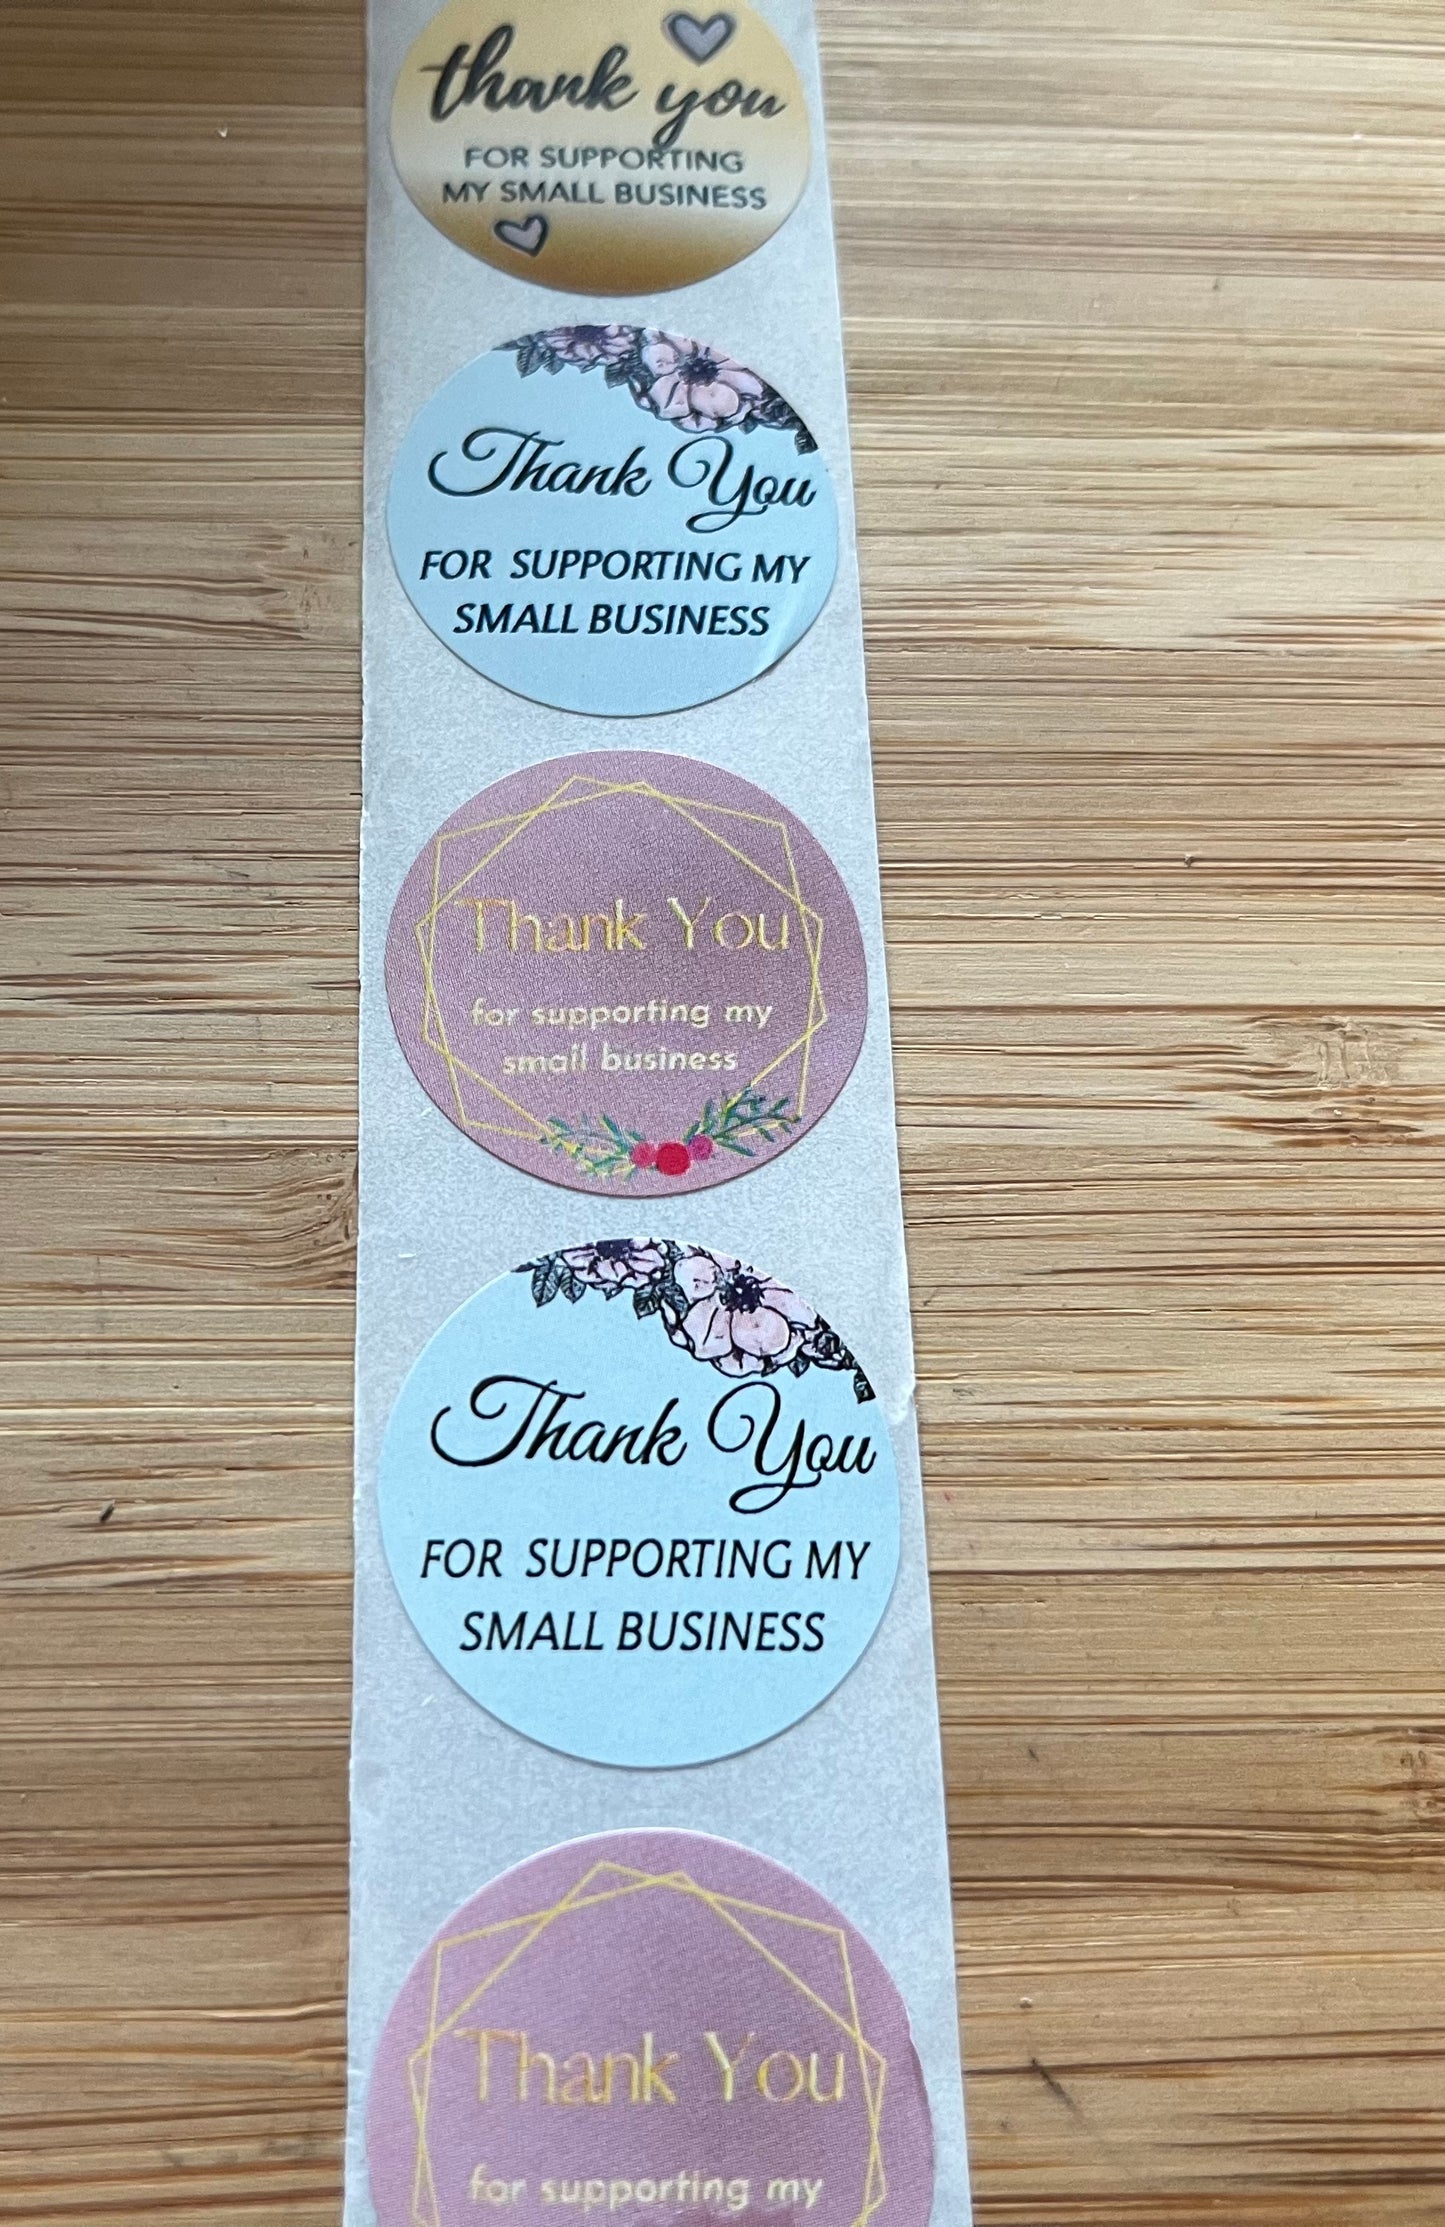 Thank you for supporting my small business stickers